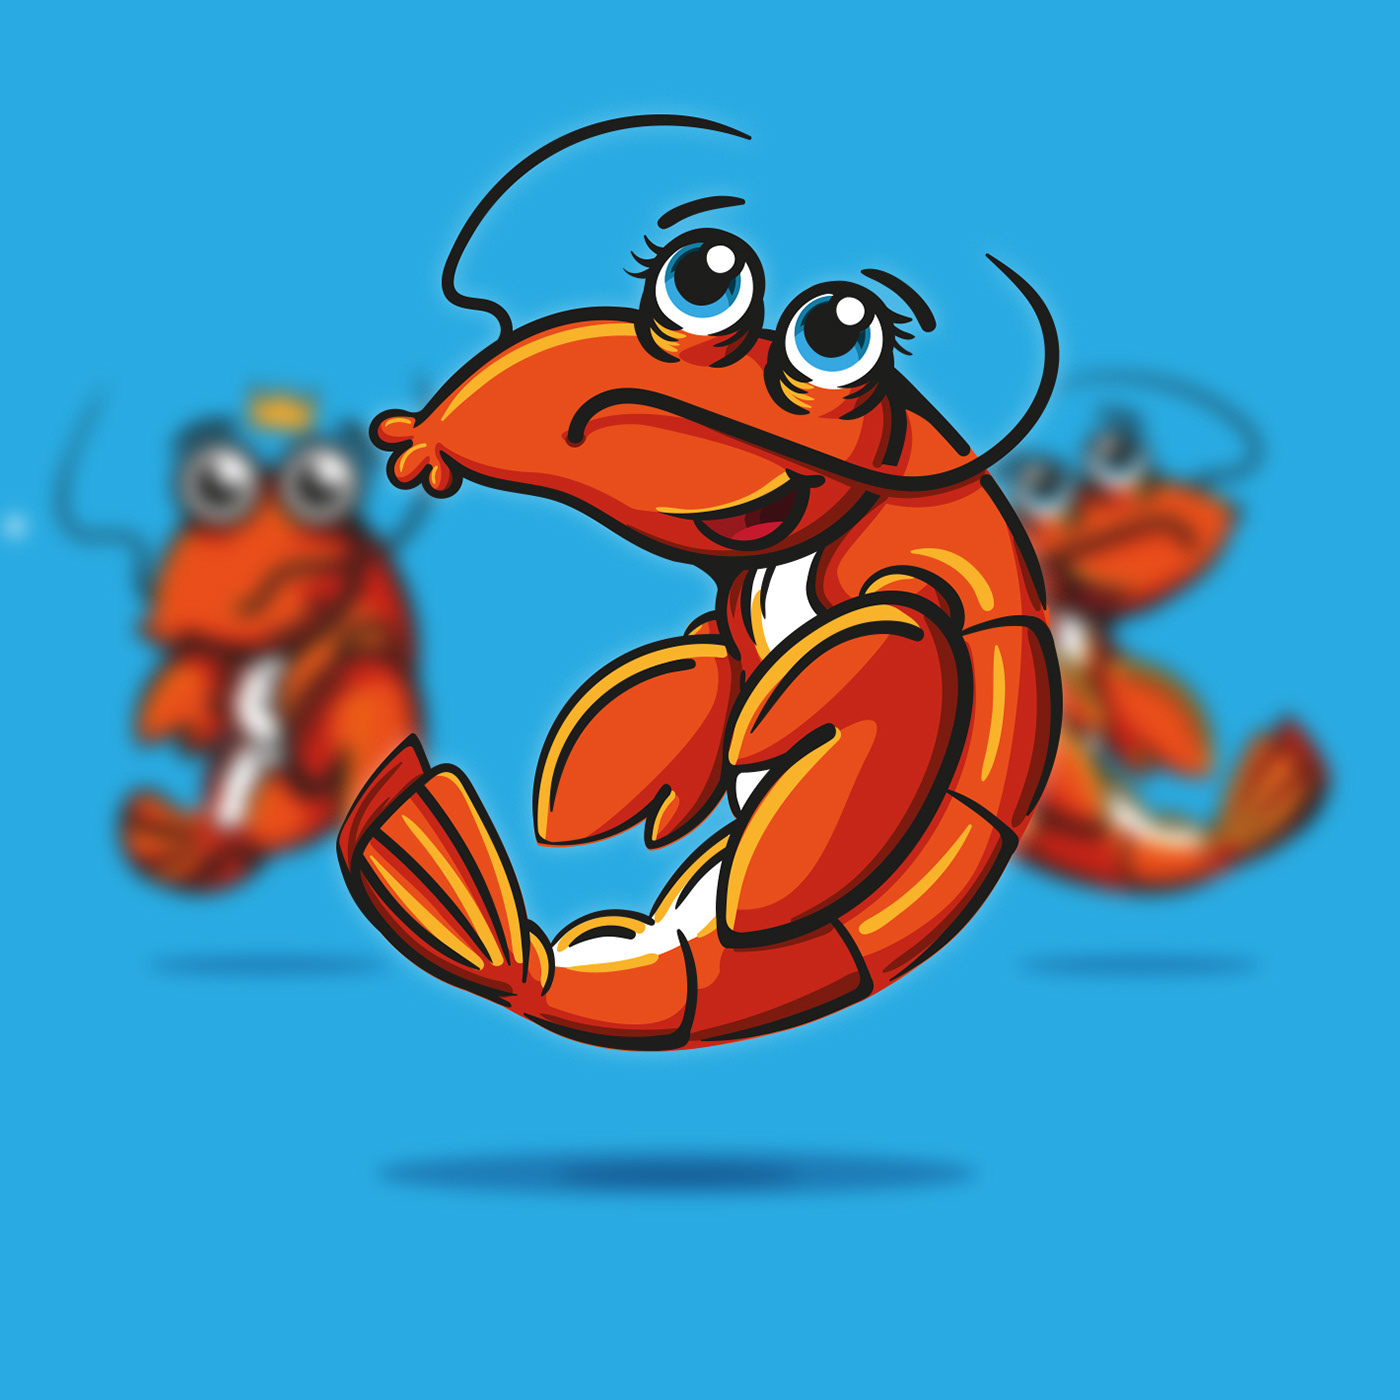 Character Character design  graphic design  ILLUSTRATION  lobster Mascot mascote Ocean Portugal seafood